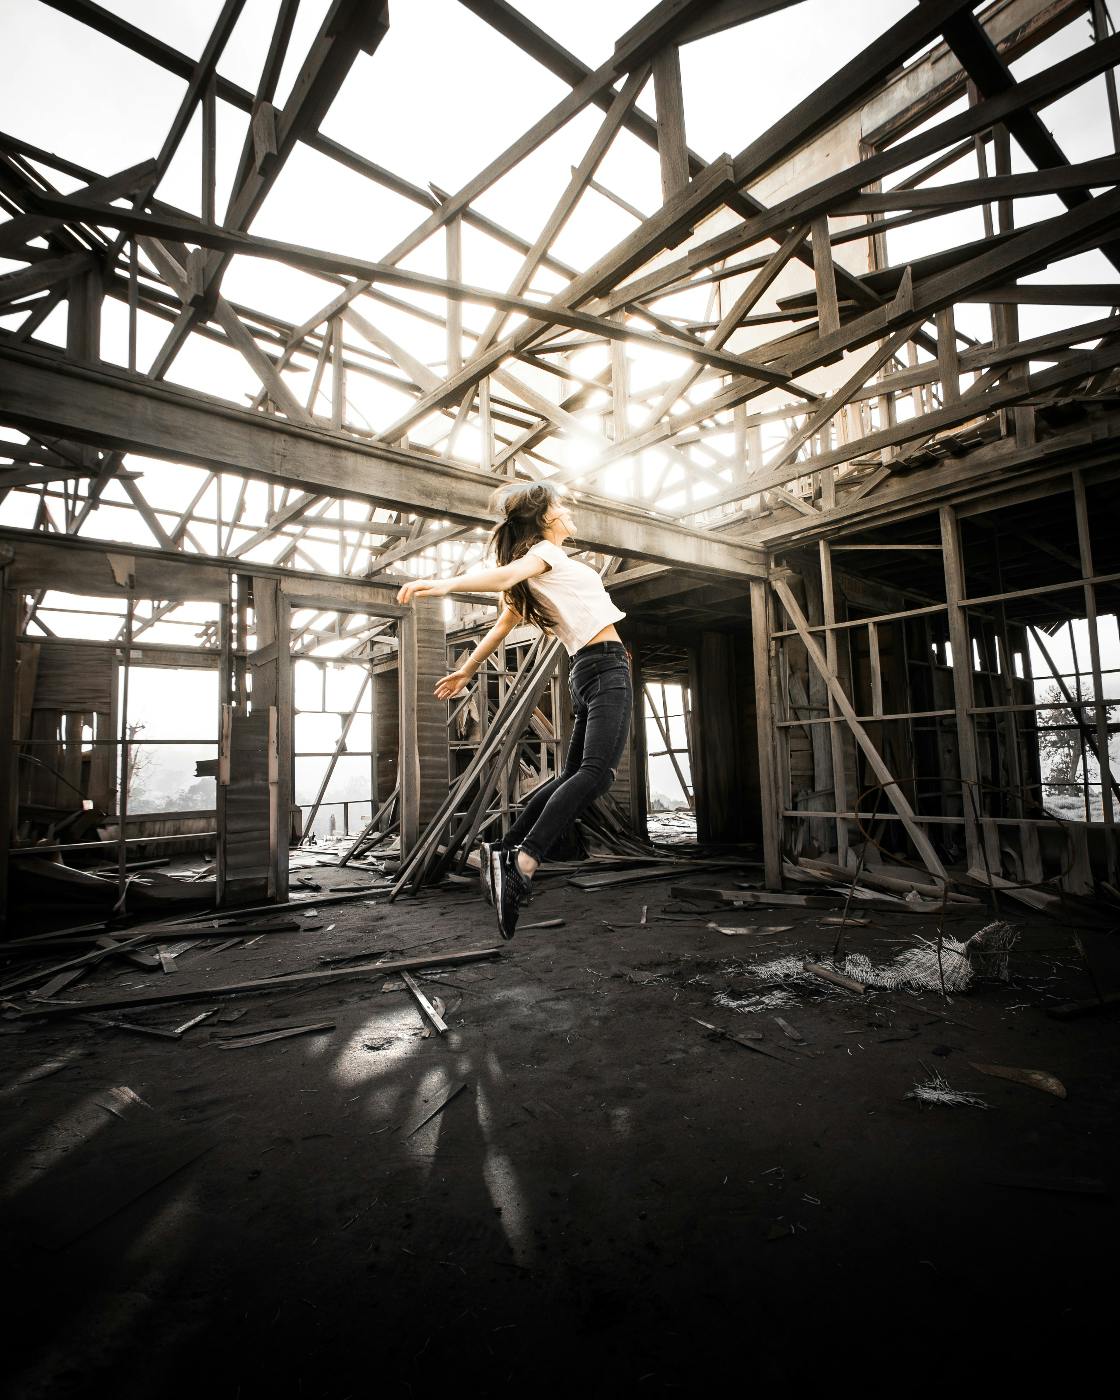 A woman leaping in an unfinished house